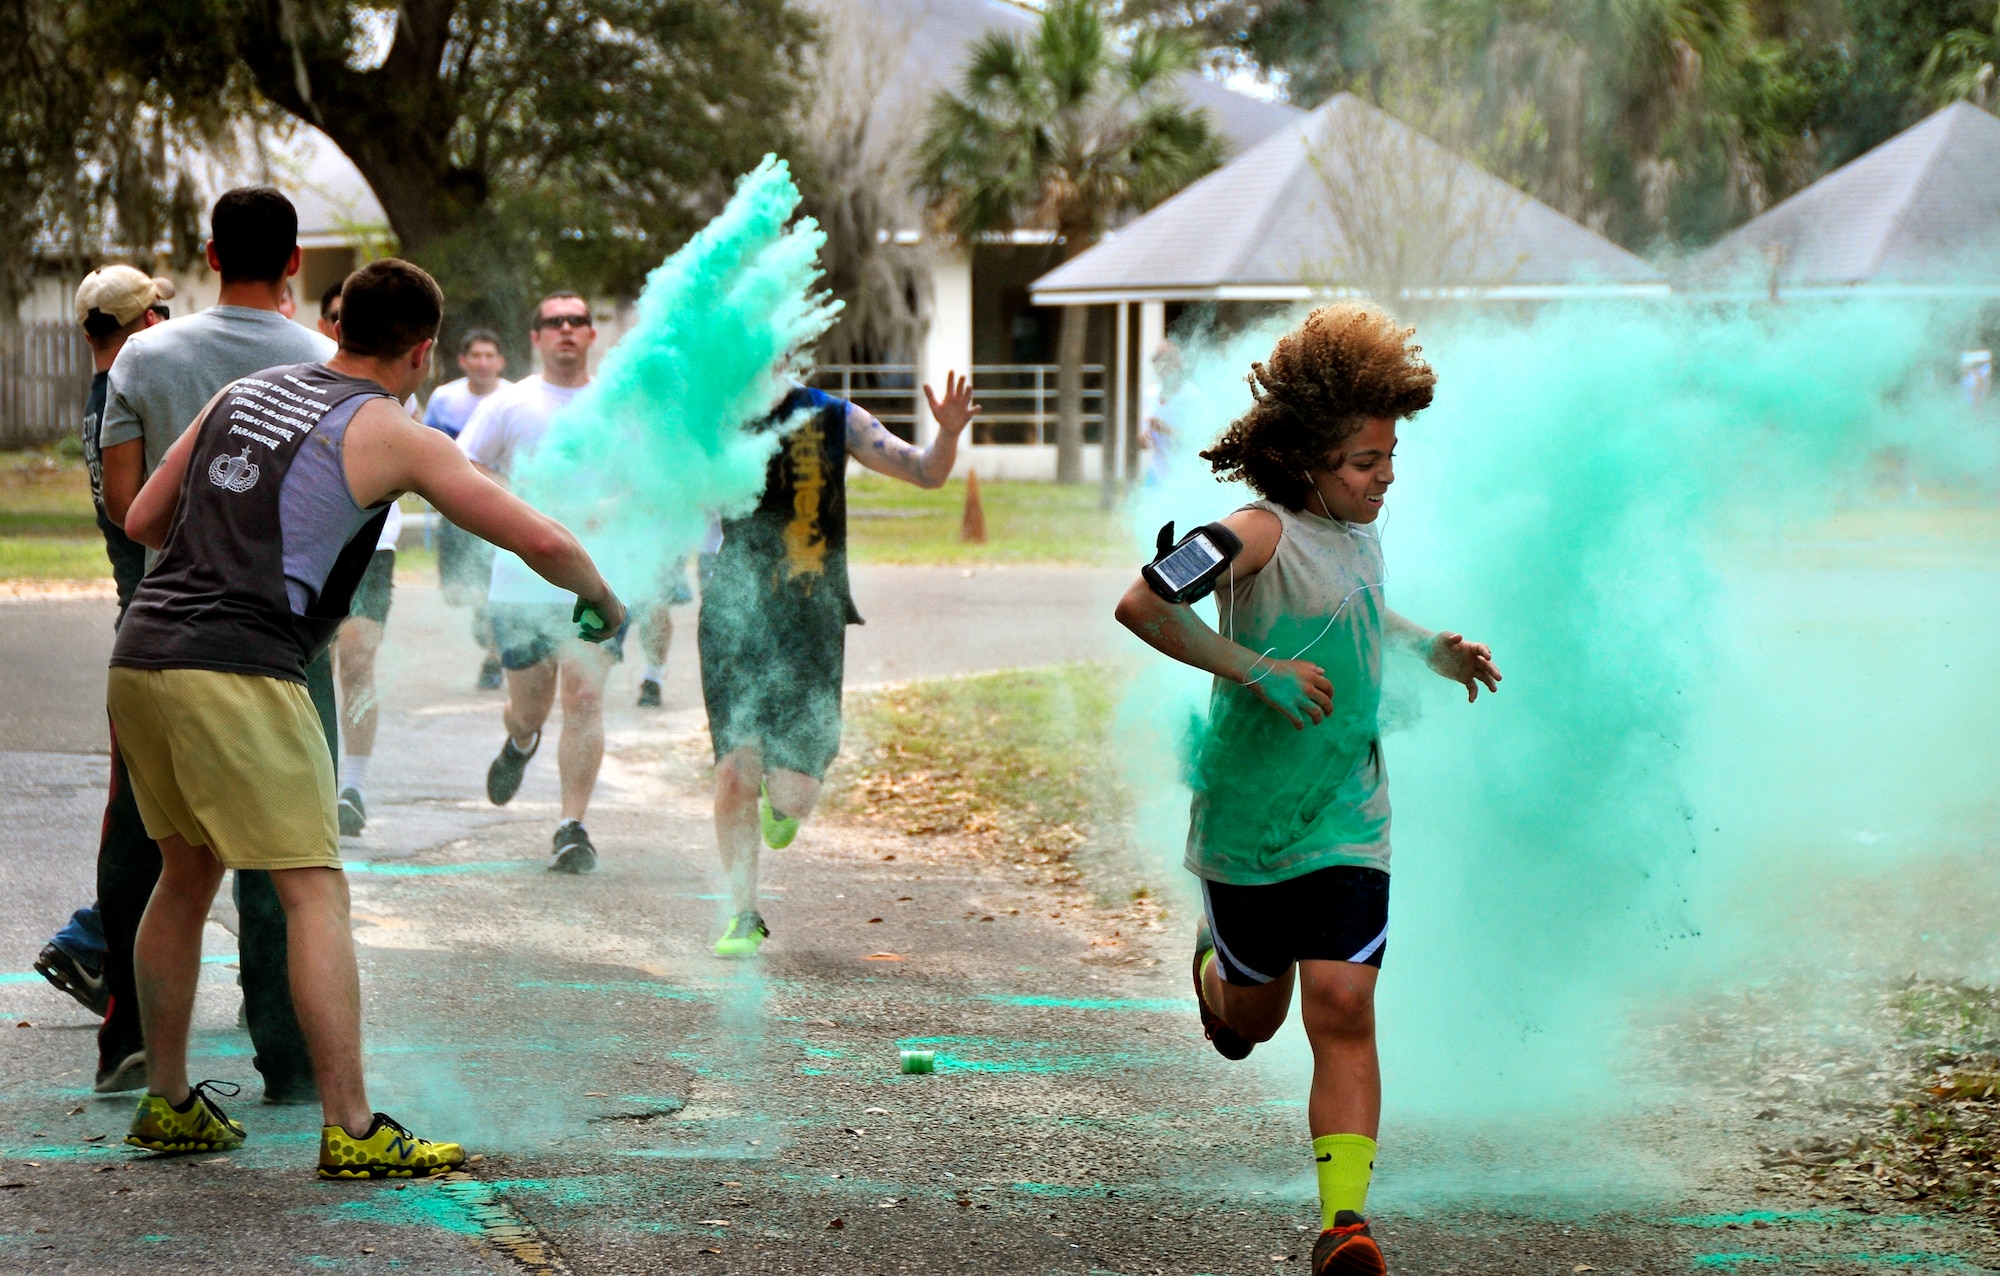 A participant runs through the green dust during the Color Me Aware fun run, April 4, at Eglin Air Force Base, Fla.  Approximately 30 volunteers helped more than 450 participants get colorful during three color zones of the three-mile run.  The event highlighted the start of Sexual Assault Awareness Month. (U.S. Air Force photo/Tech. Sgt. Cheryl Foster)